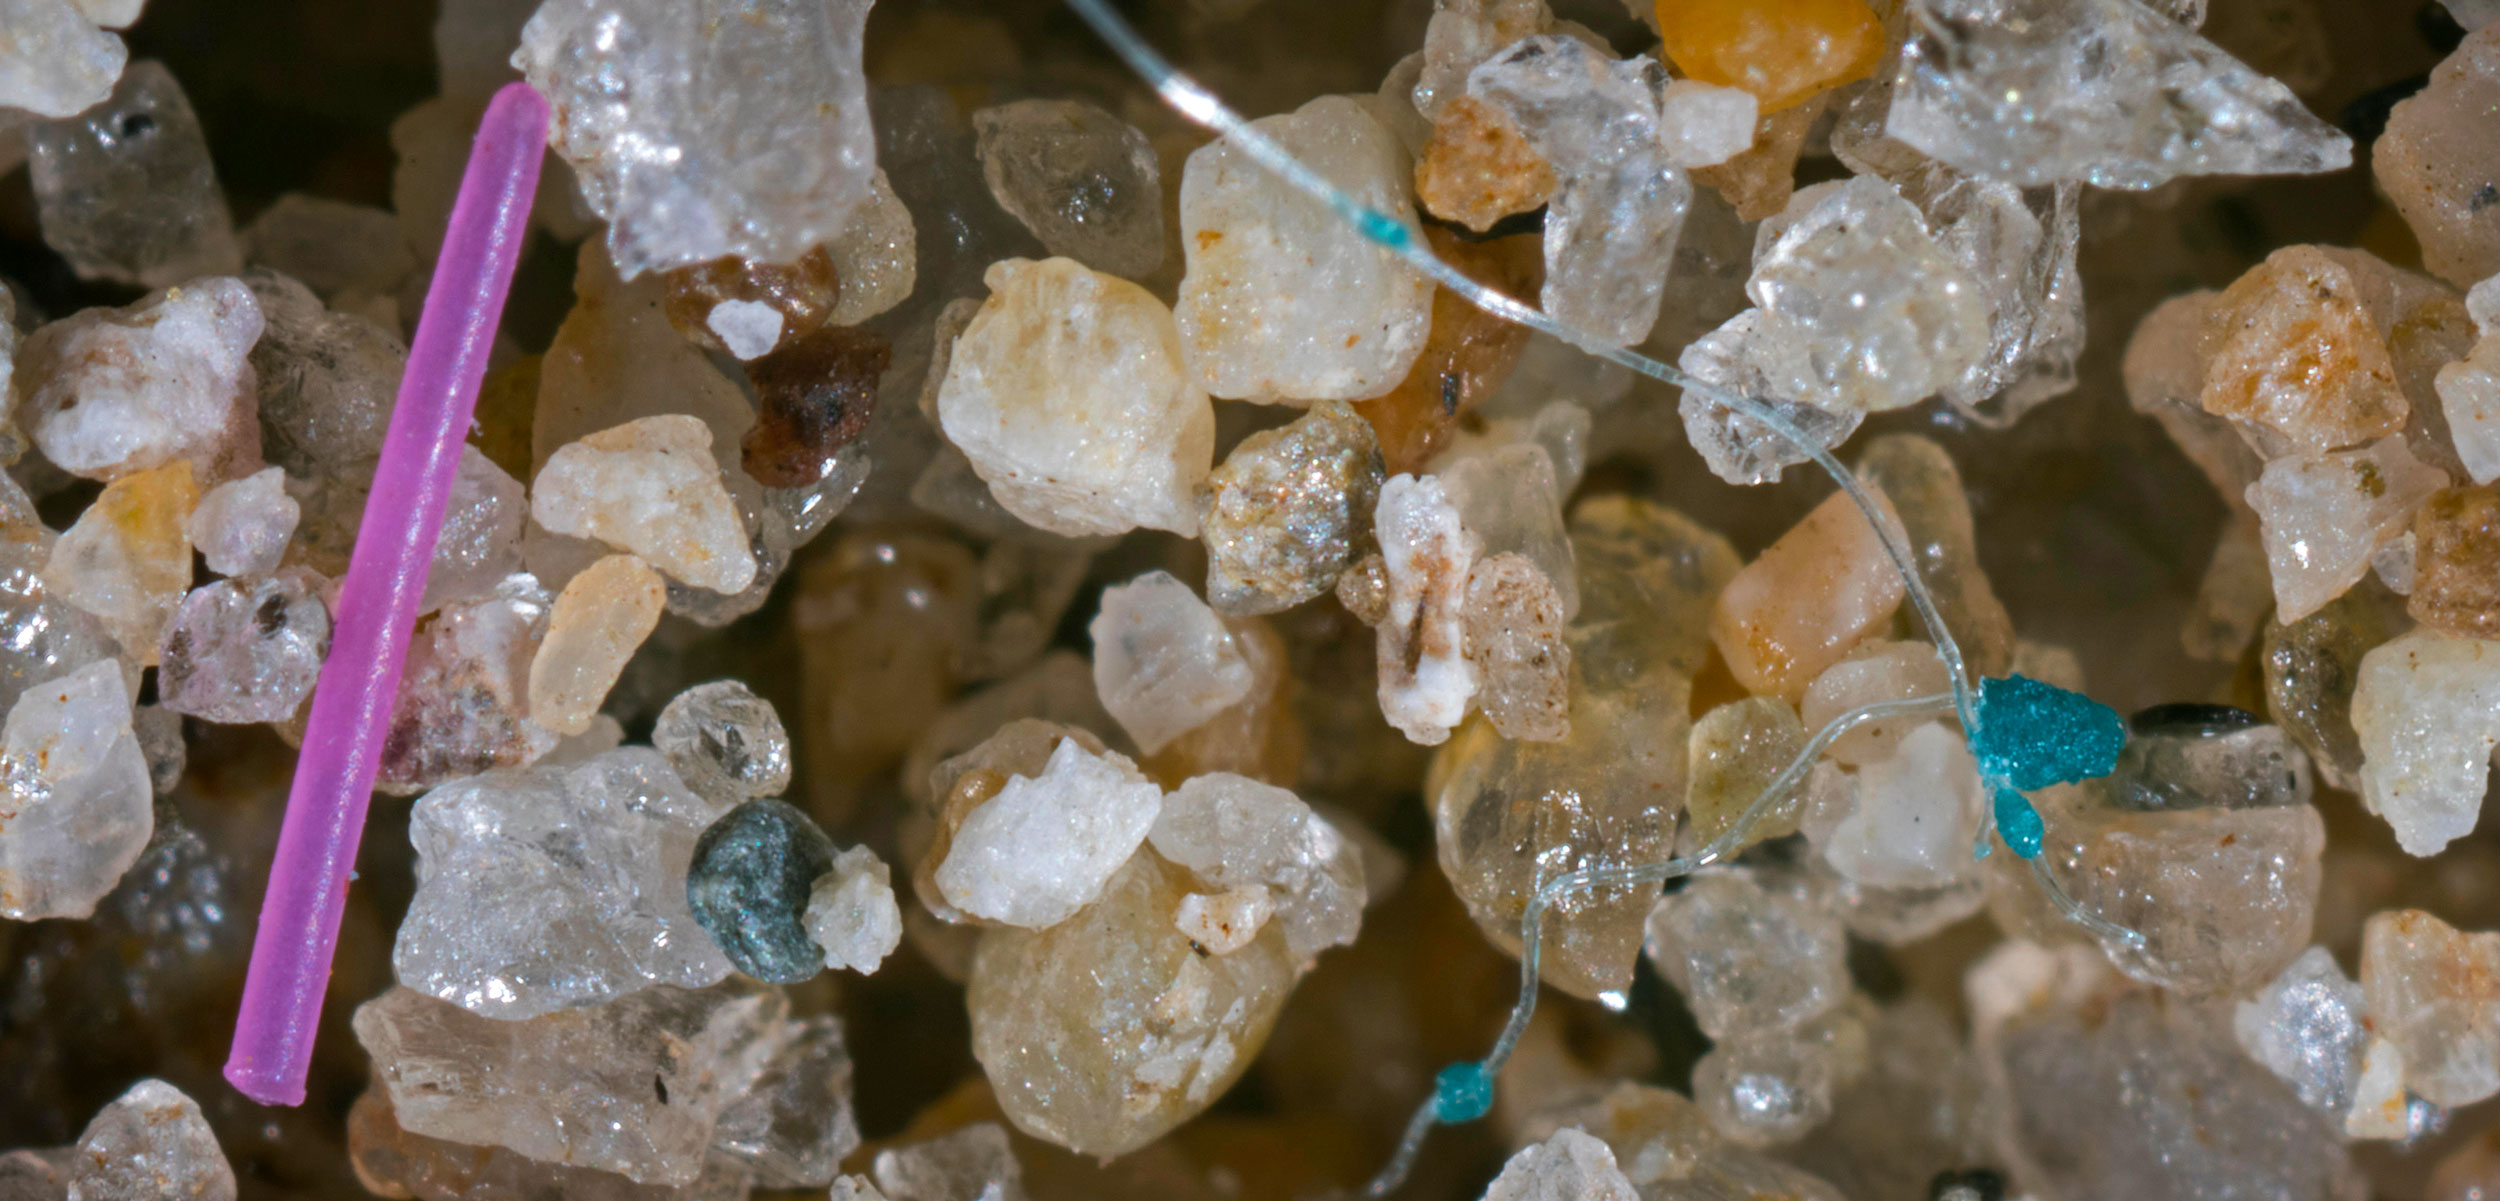 Detail of microplastics mixed with sand from a beach